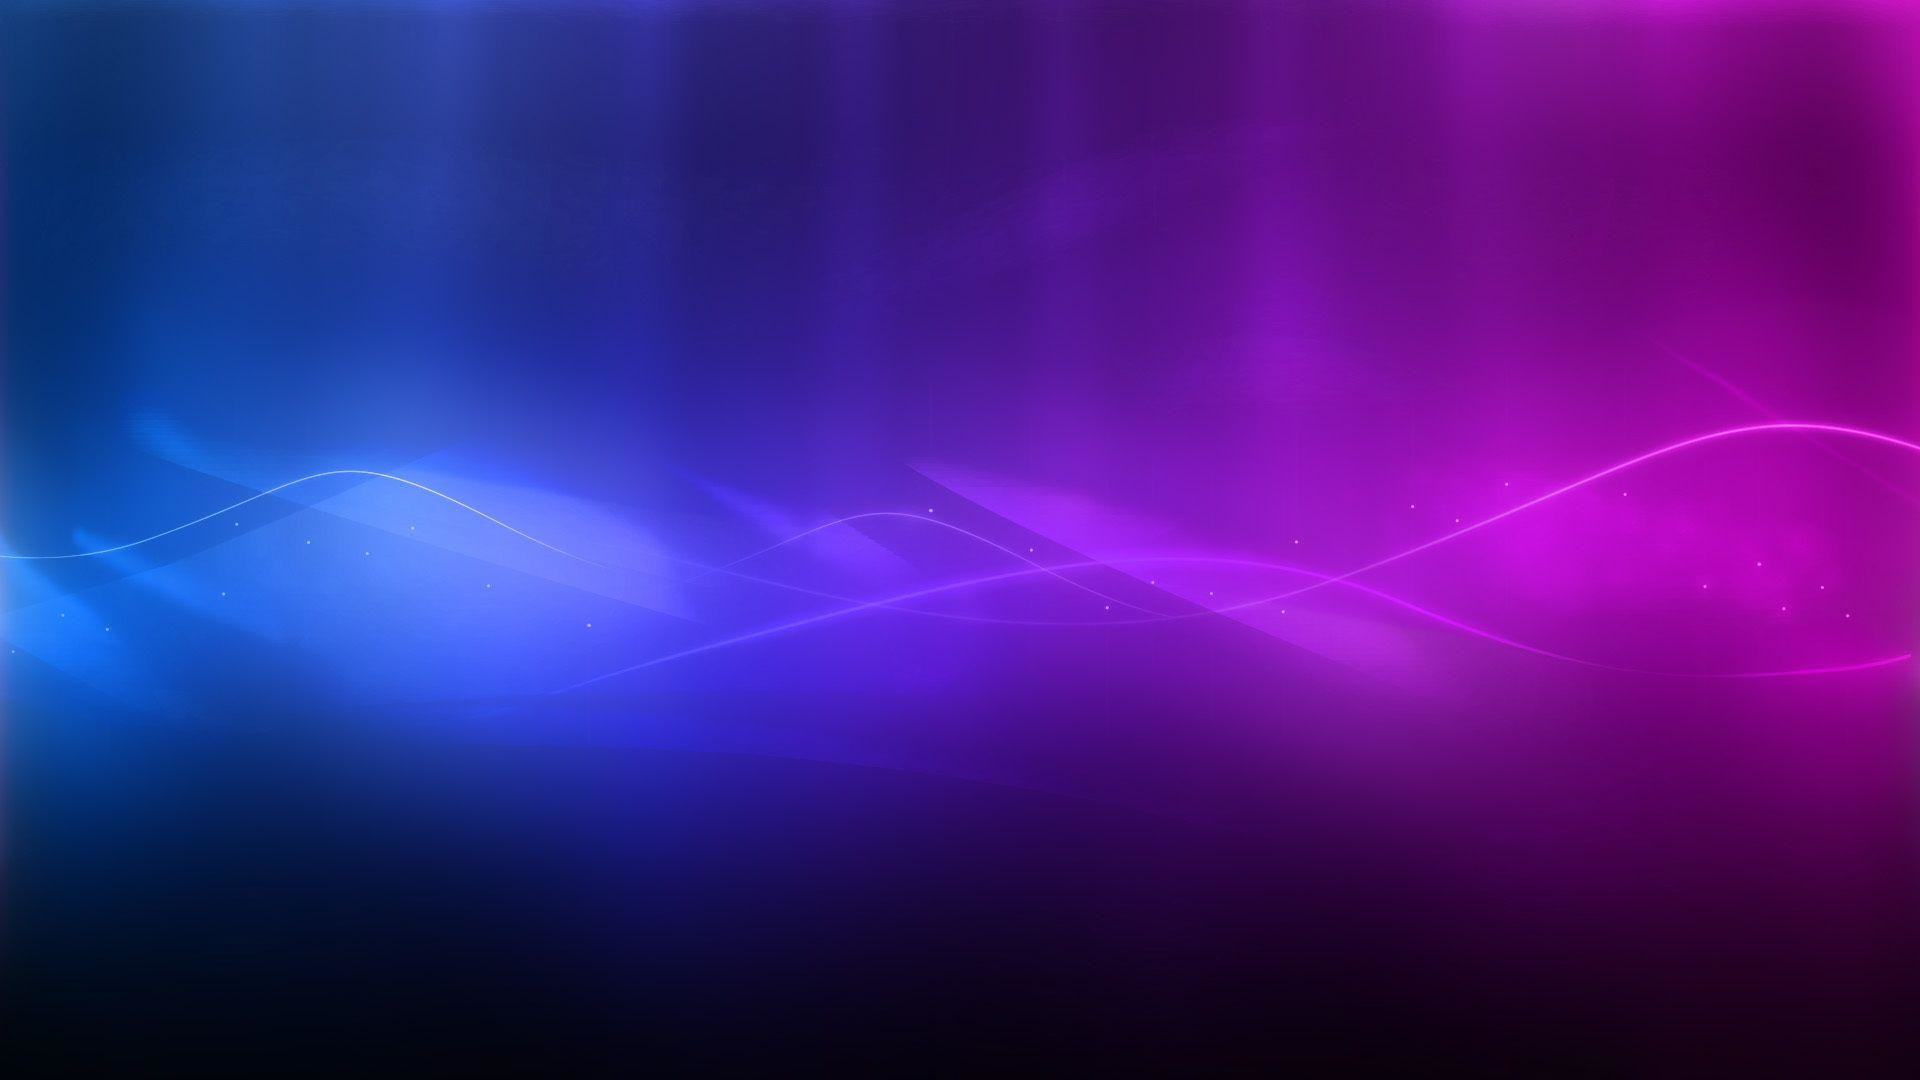 Pink And Blue Wallpapers